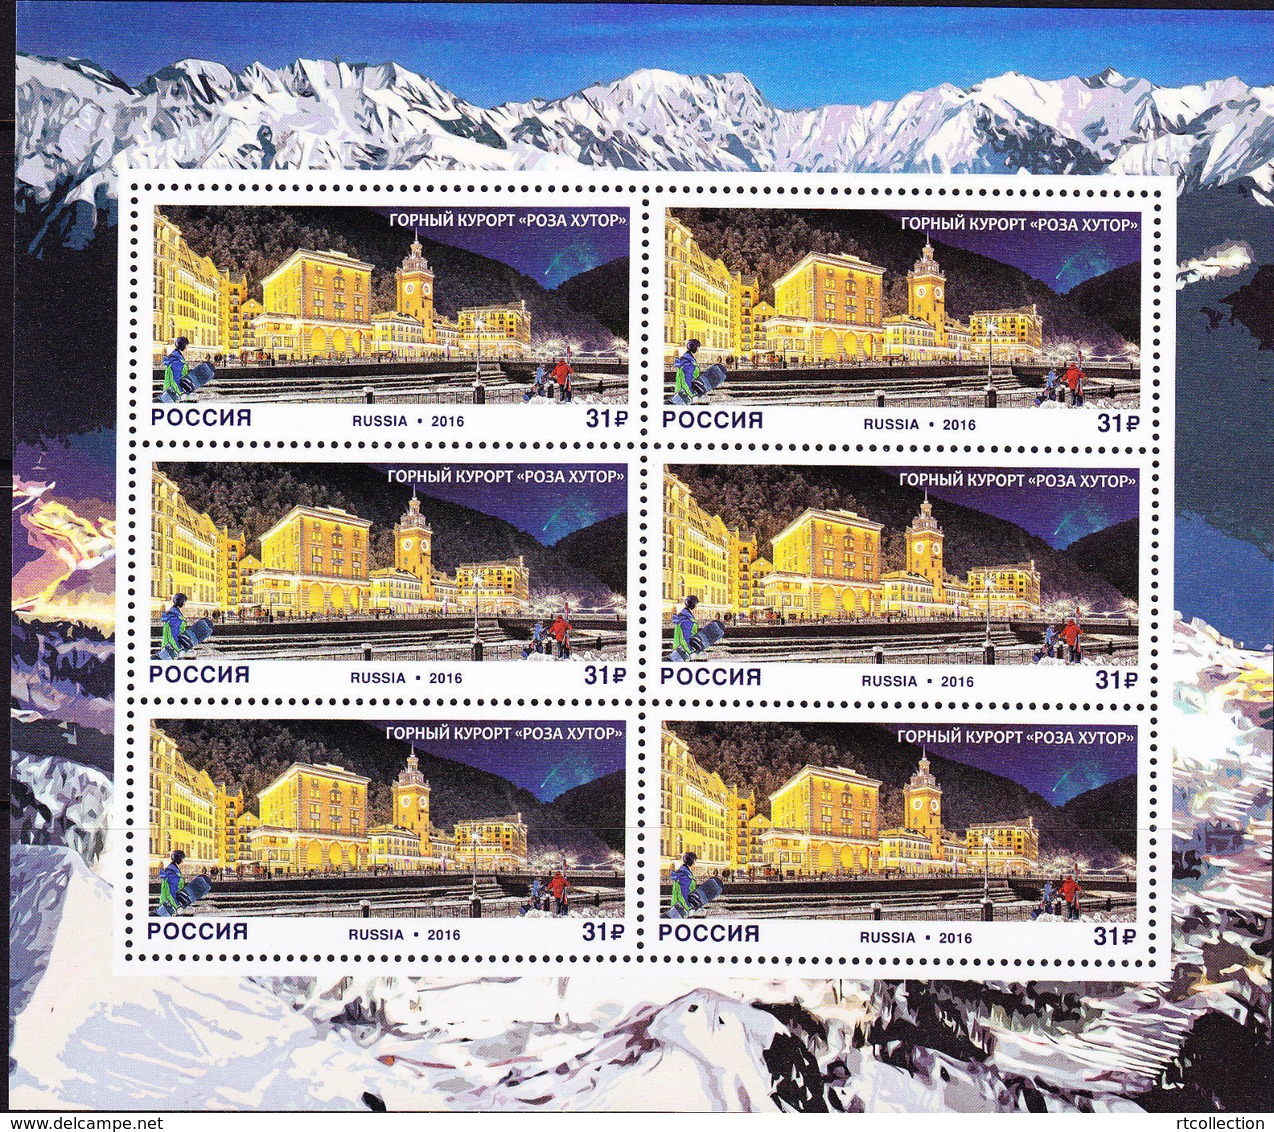 Russia 2016 Sheet Tourism Rosa Khutor Alpine Resort Krasnodar Krai Architecture Geography Place Holiday Hotel Stamps MNH - Collections